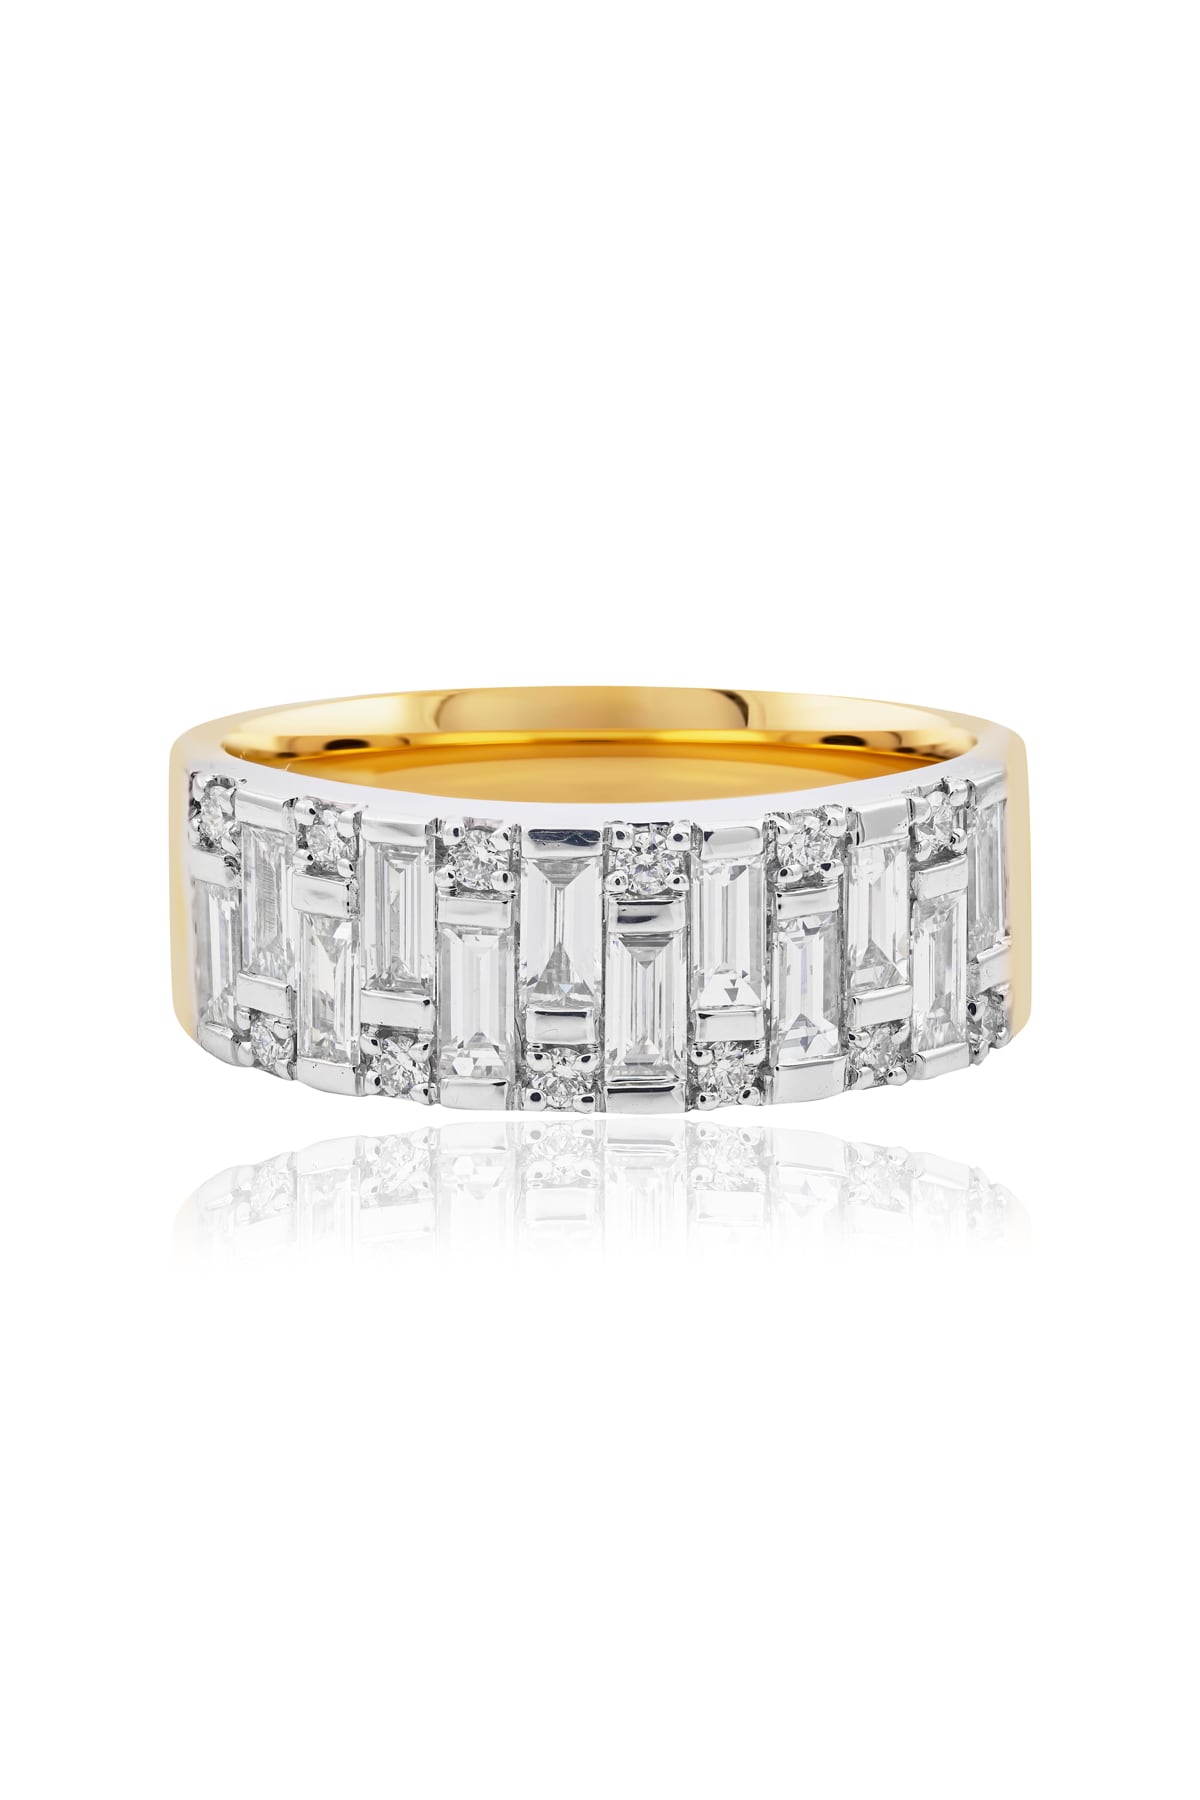 Wide Diamond Dress Ring In Yellow & White Gold from LeGassick.